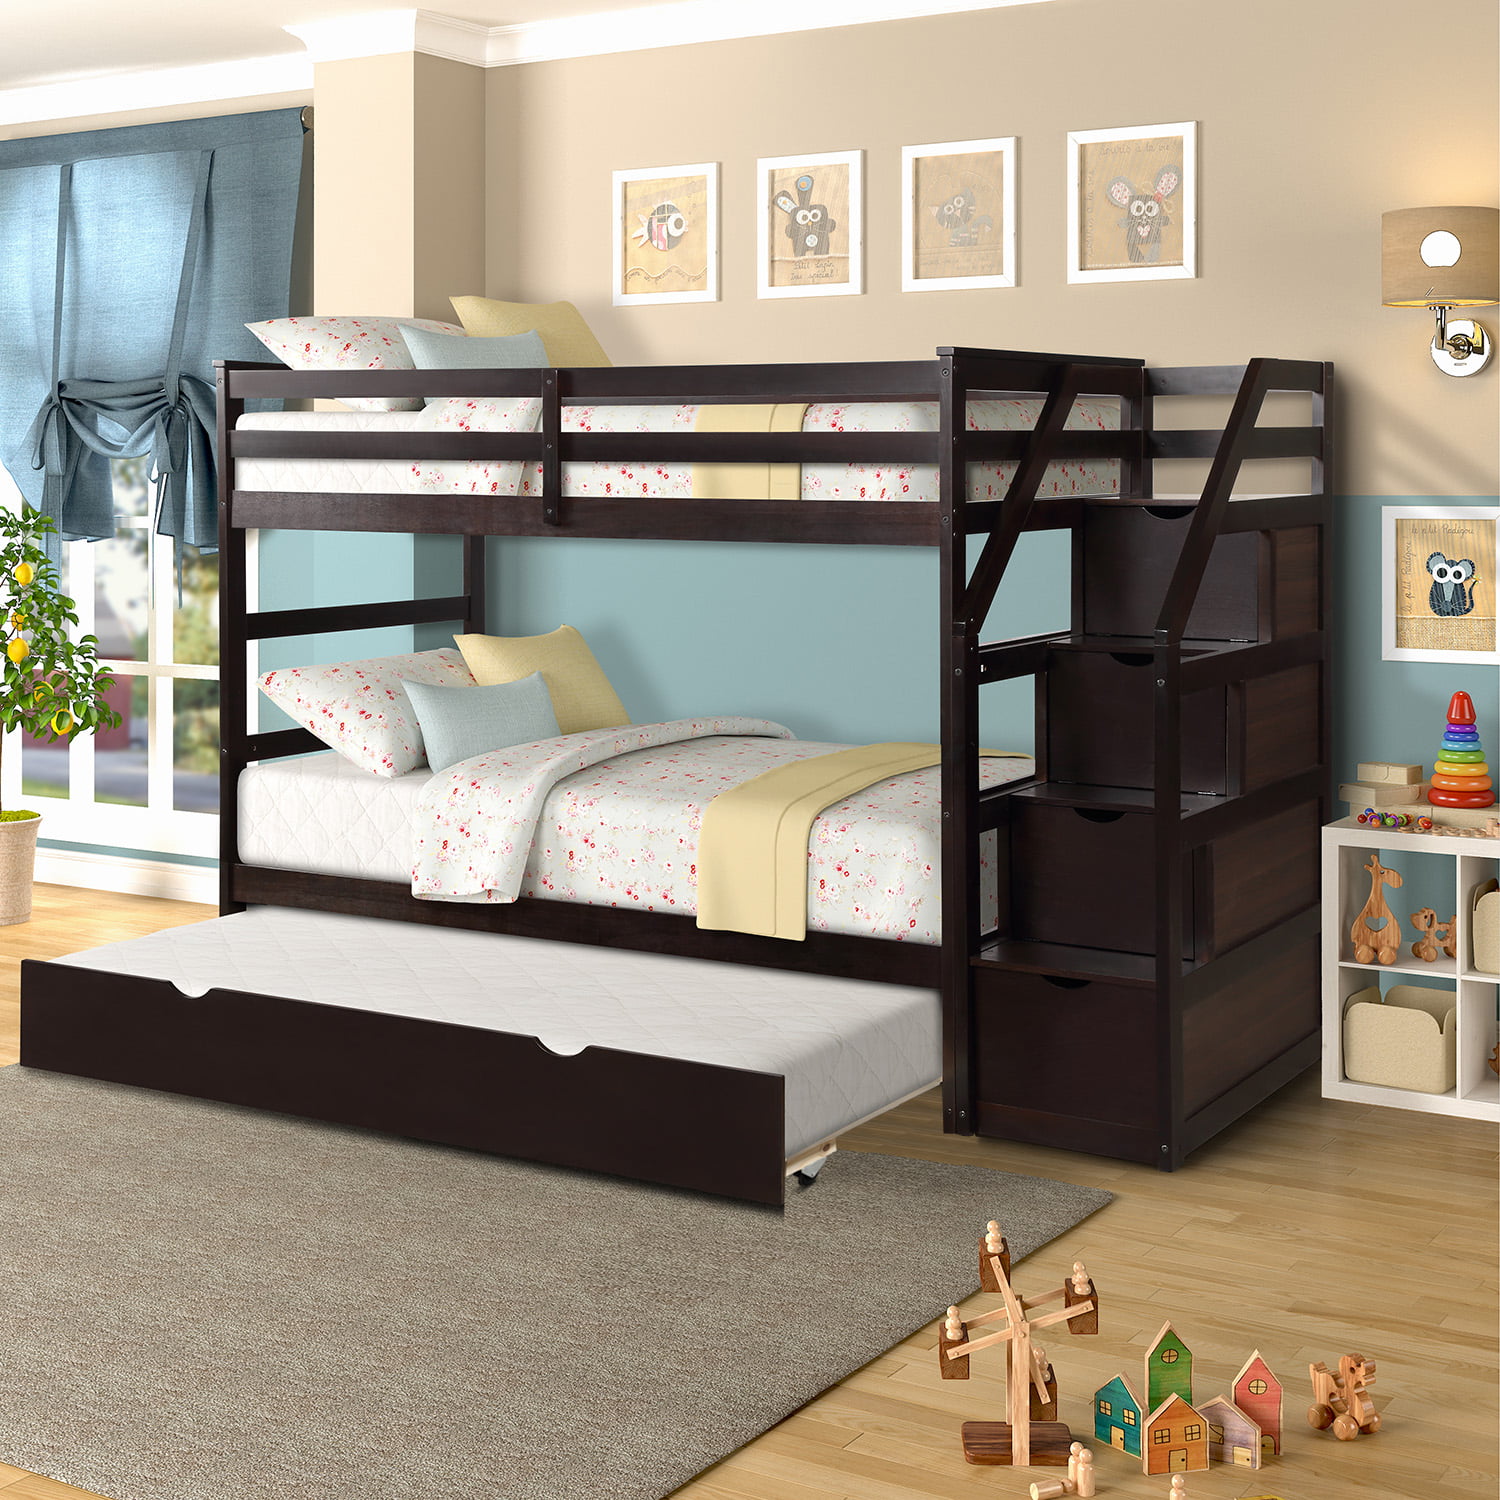 Twin Over Bunk Beds For 3 12 Kids, What Is A Good Size Bed For 12 Year Old